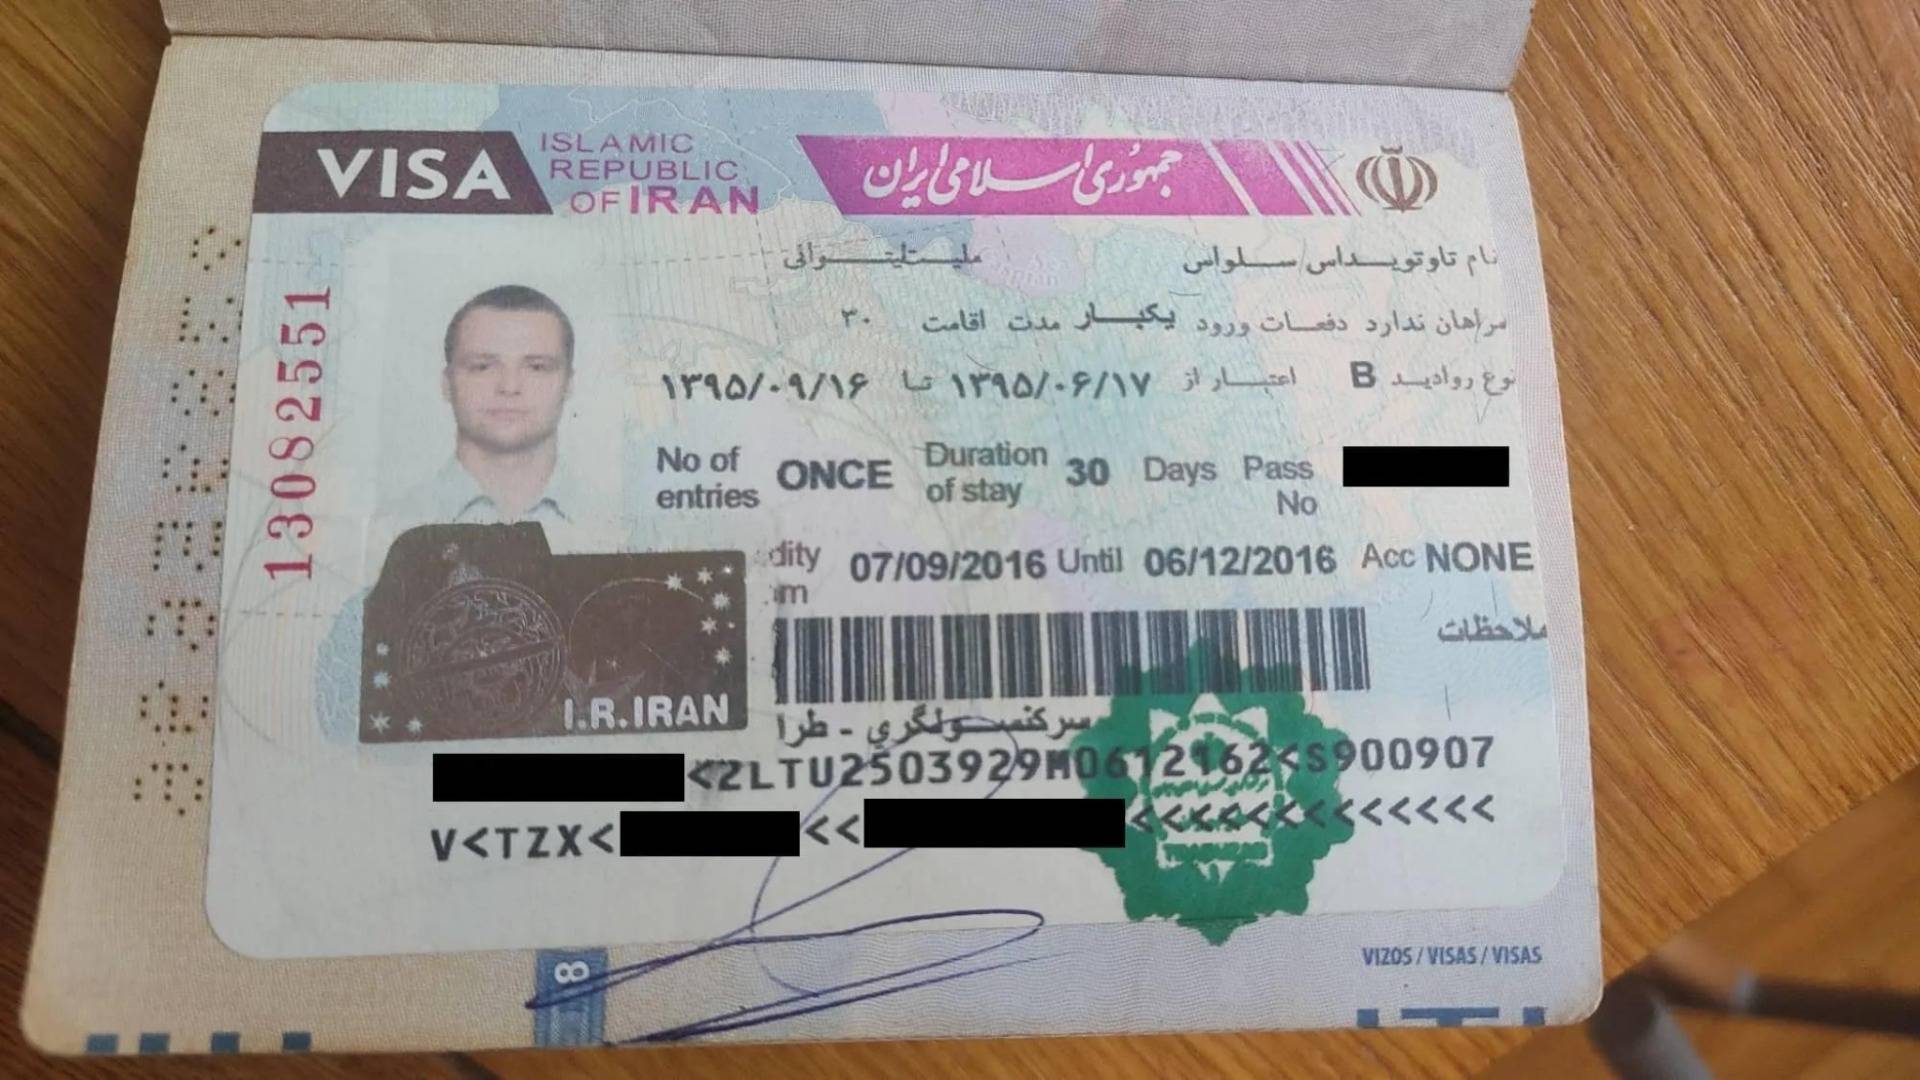 This visa type is acquired by individuals traveling to Iran by land